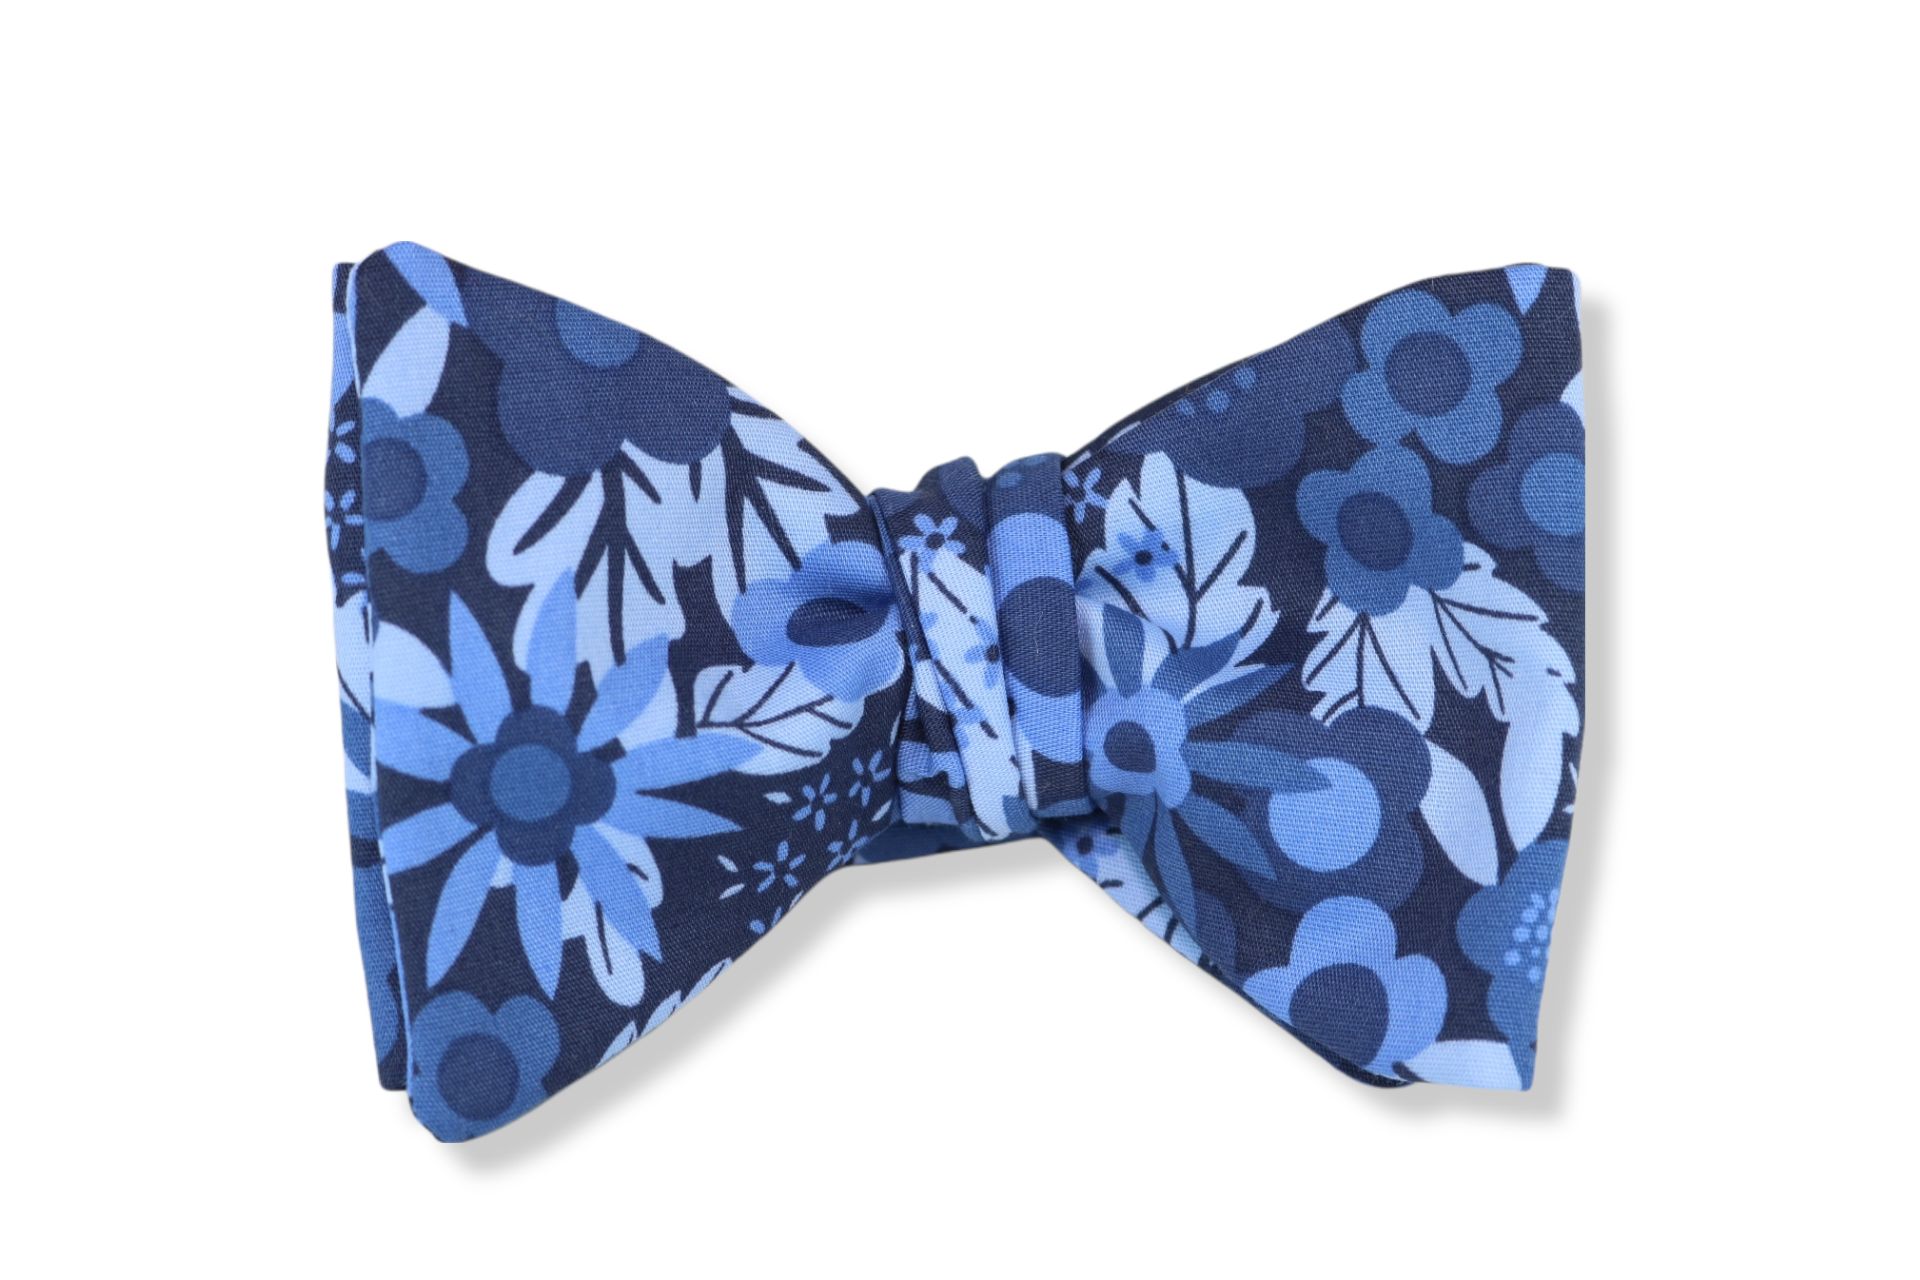 Cotton Collection – The Bow Style